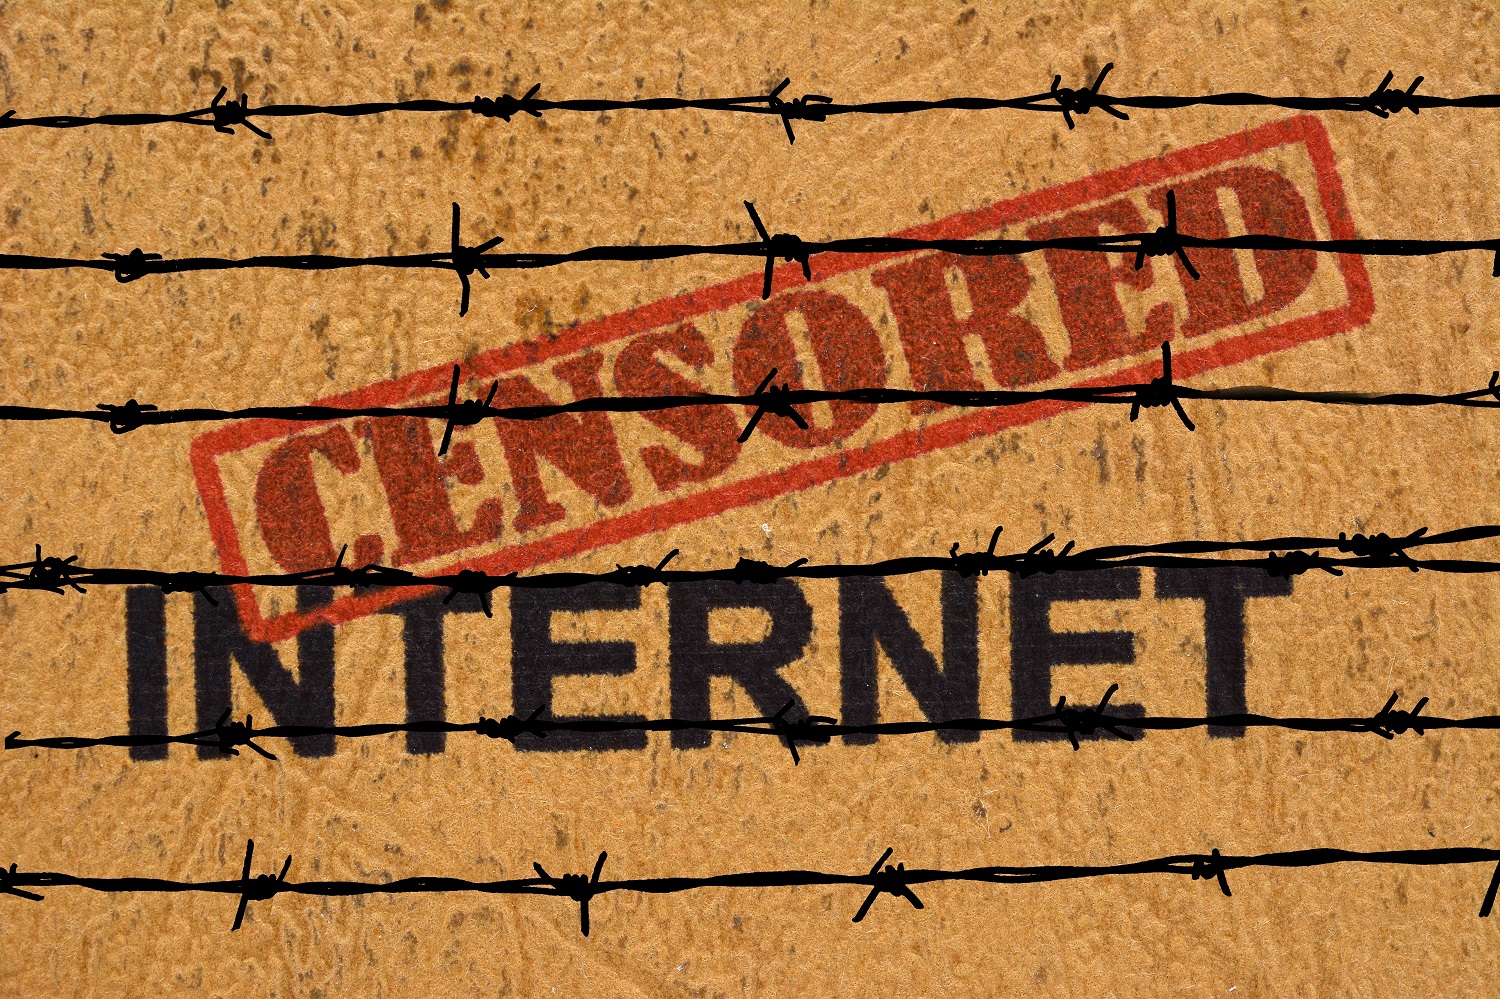 Image of Censored Adult XXX Internet with Barbed wire graphic